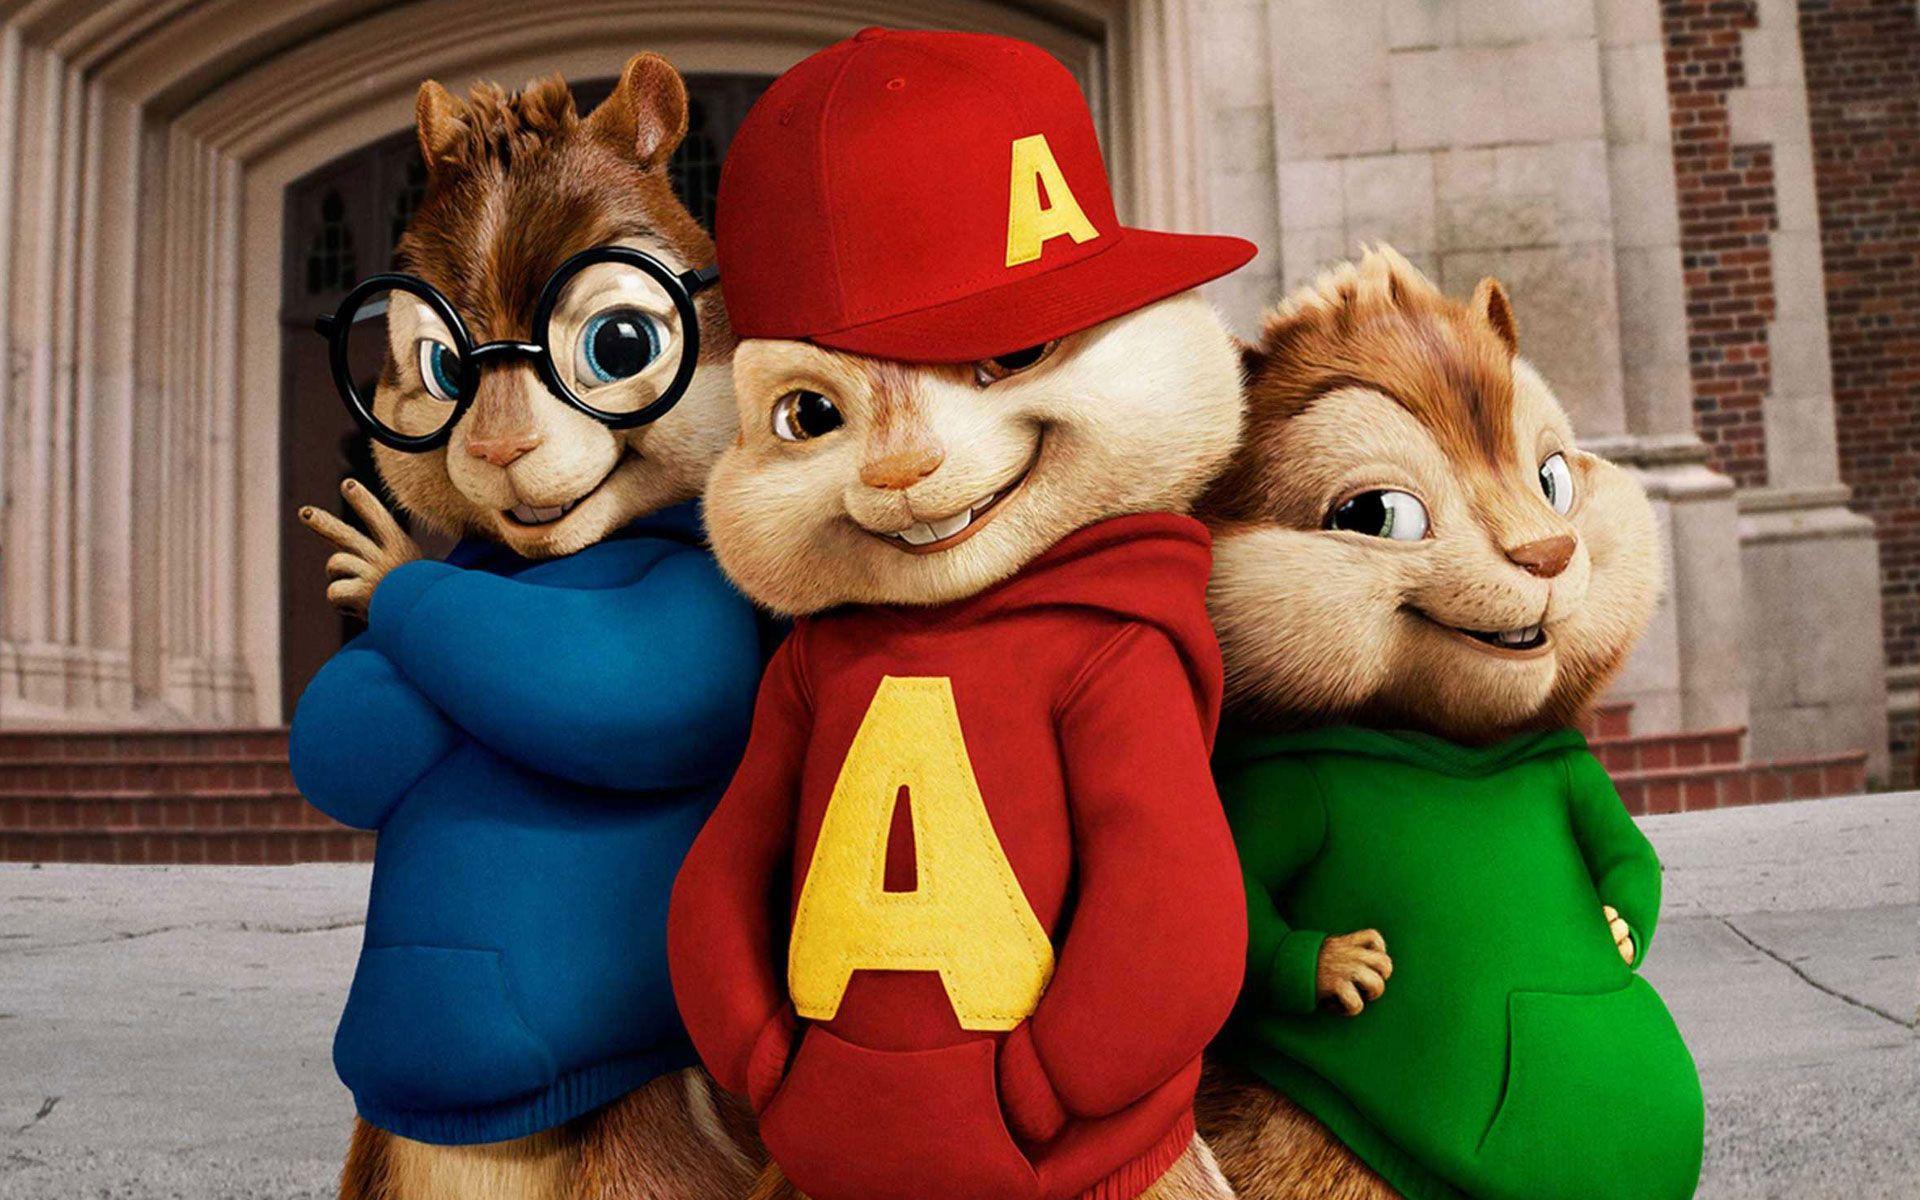 You can also upload and share your favorite Alvin and the Chipmunks wallpap...